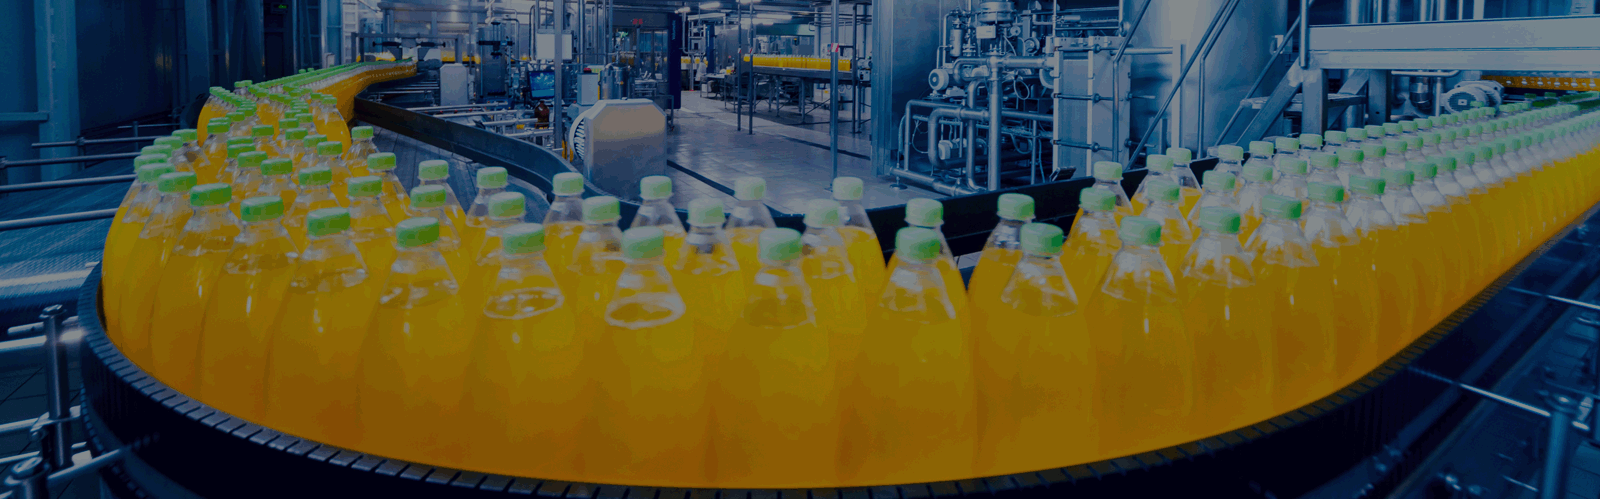 food automation solutions, food manufacturing solutions, Orange soda on a conveyer line